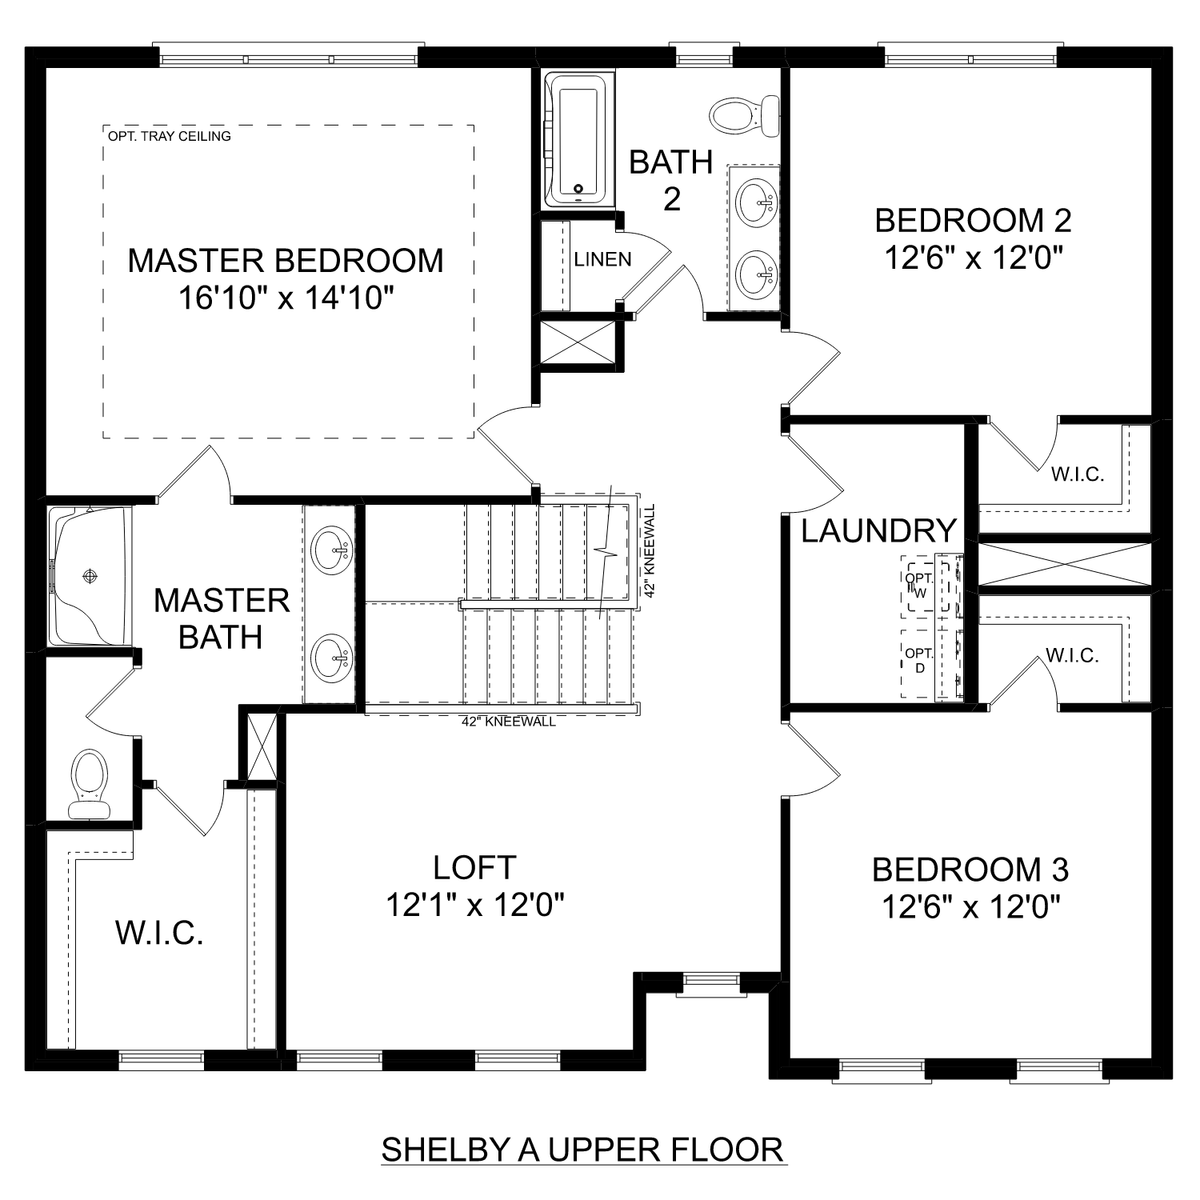 2 - The Shelby A buildable floor plan layout in Davidson Homes' Williams Pointe community.